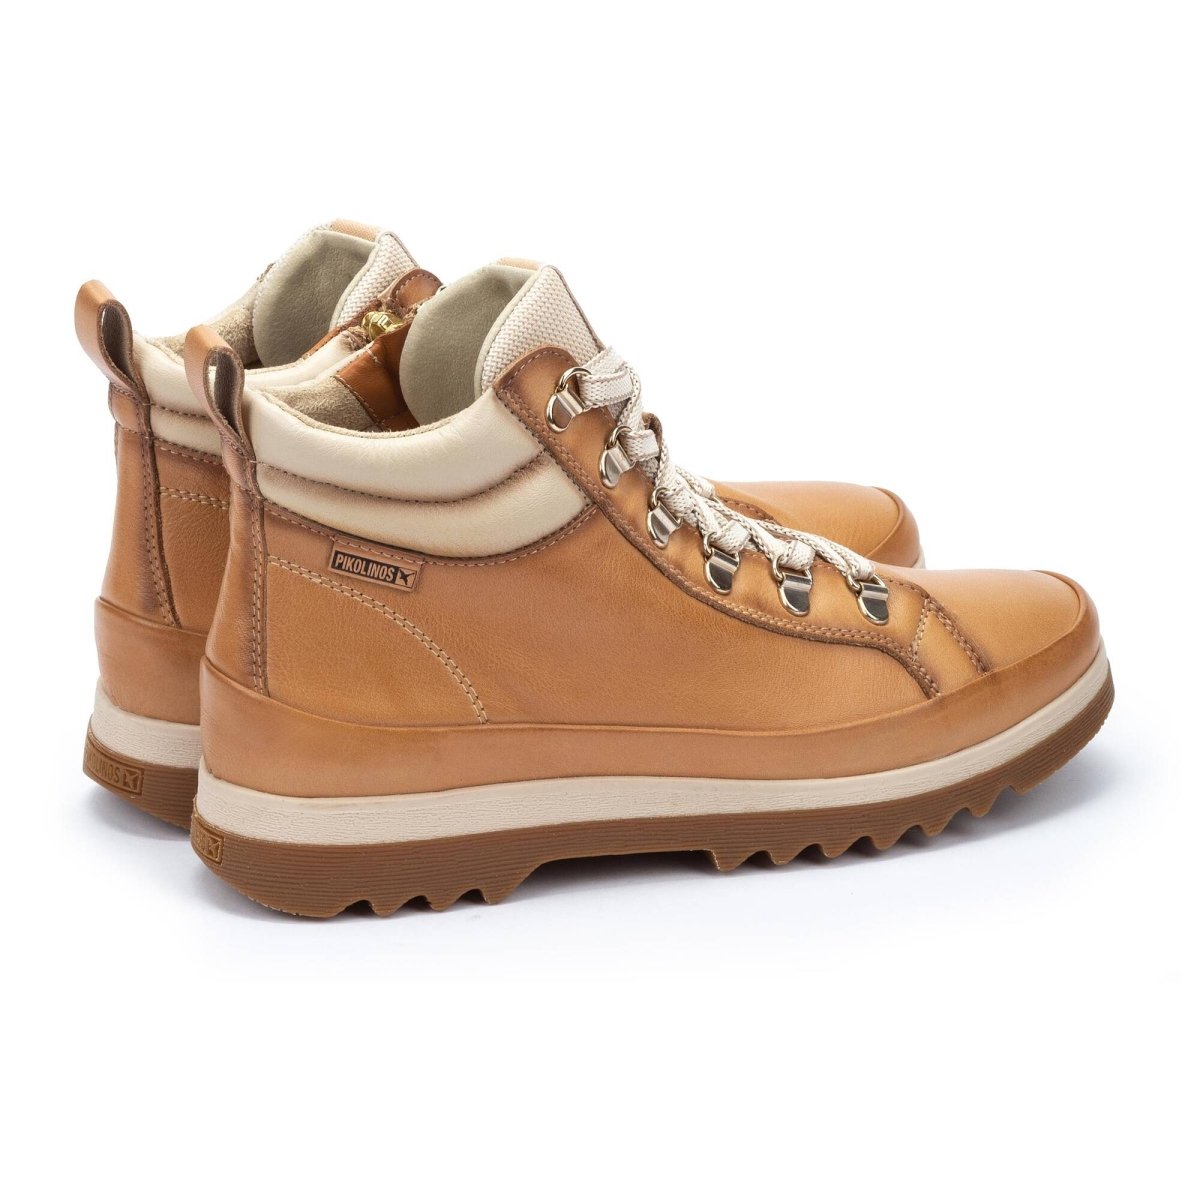 PIKOLINOS VIGO W3W-8564C1 WOMEN'S LACED AND ZIPPER CLOSURE ANKLE BOOTS IN ALMOND - TLW Shoes